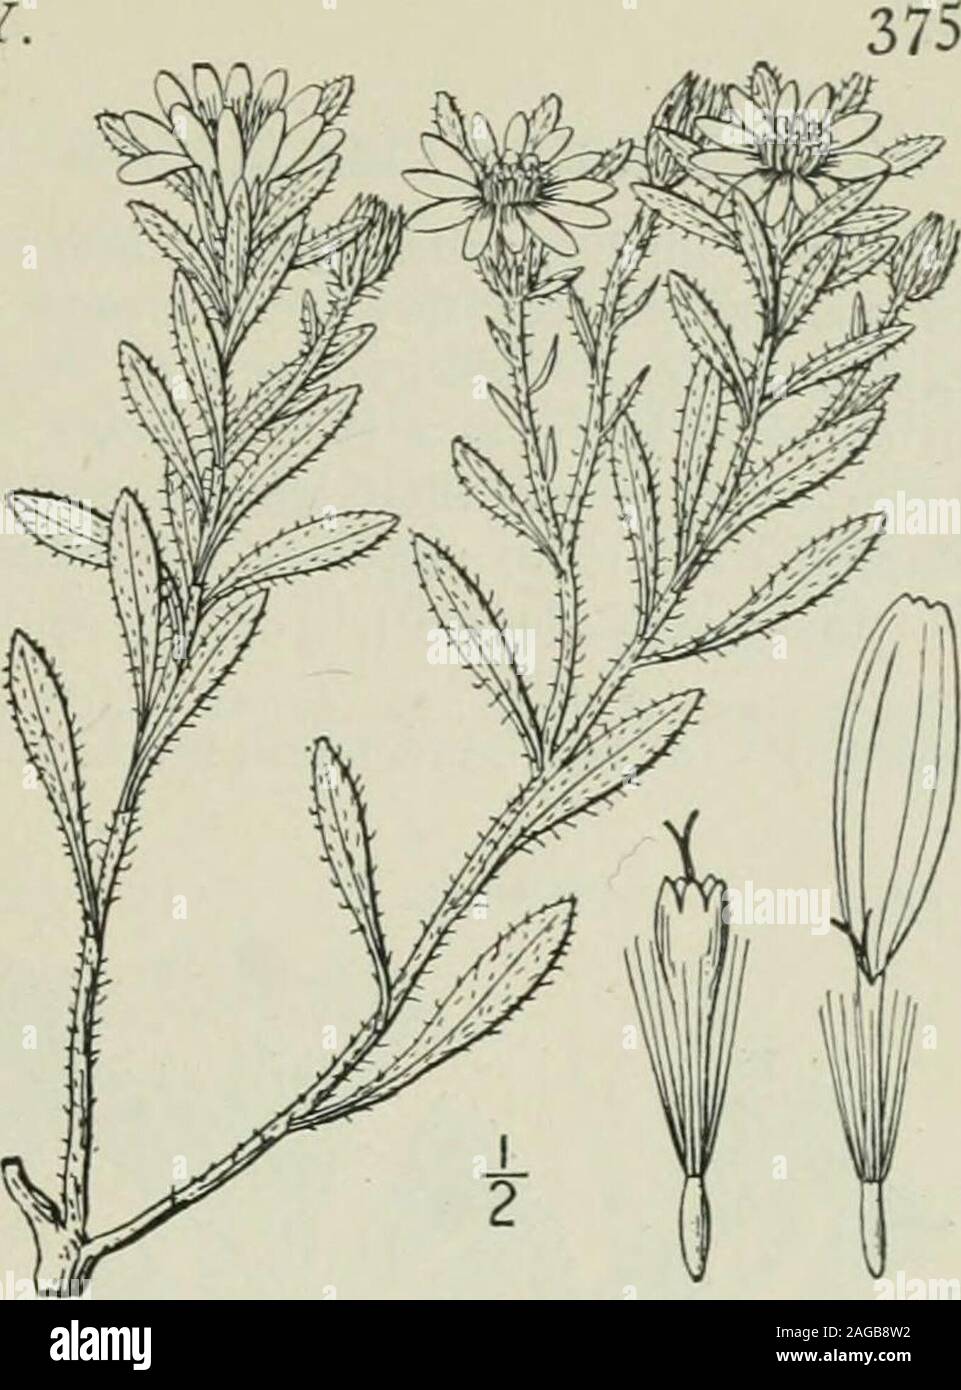 . An illustrated flora of the northern United States, Canada and the British possessions : from Newfoundland to the parallel of the southern boundary of Virginia and from the Atlantic Ocean westward to the 102nd meridian. 7. Chrysopsis hispida (Hook.) Nutt. Hispid Golden Aster. Fig. 4201. Diplopappus hispidus Hook. Fl. Bor. Am. 2: 22. 1834.Chrysopsis hispidus Nutt. Trans. Am. Phil. Soc. (IL) 7: 316. 1841.Chrysopsis villosa var. hispida A. Gray, Syn. Fl. i: Part 2, 123. 1884. Lower than C. villosa, stem rarely over 1° high, withspreading, sparse or copious, hirsute or hispid pu-bescence, someti Stock Photo